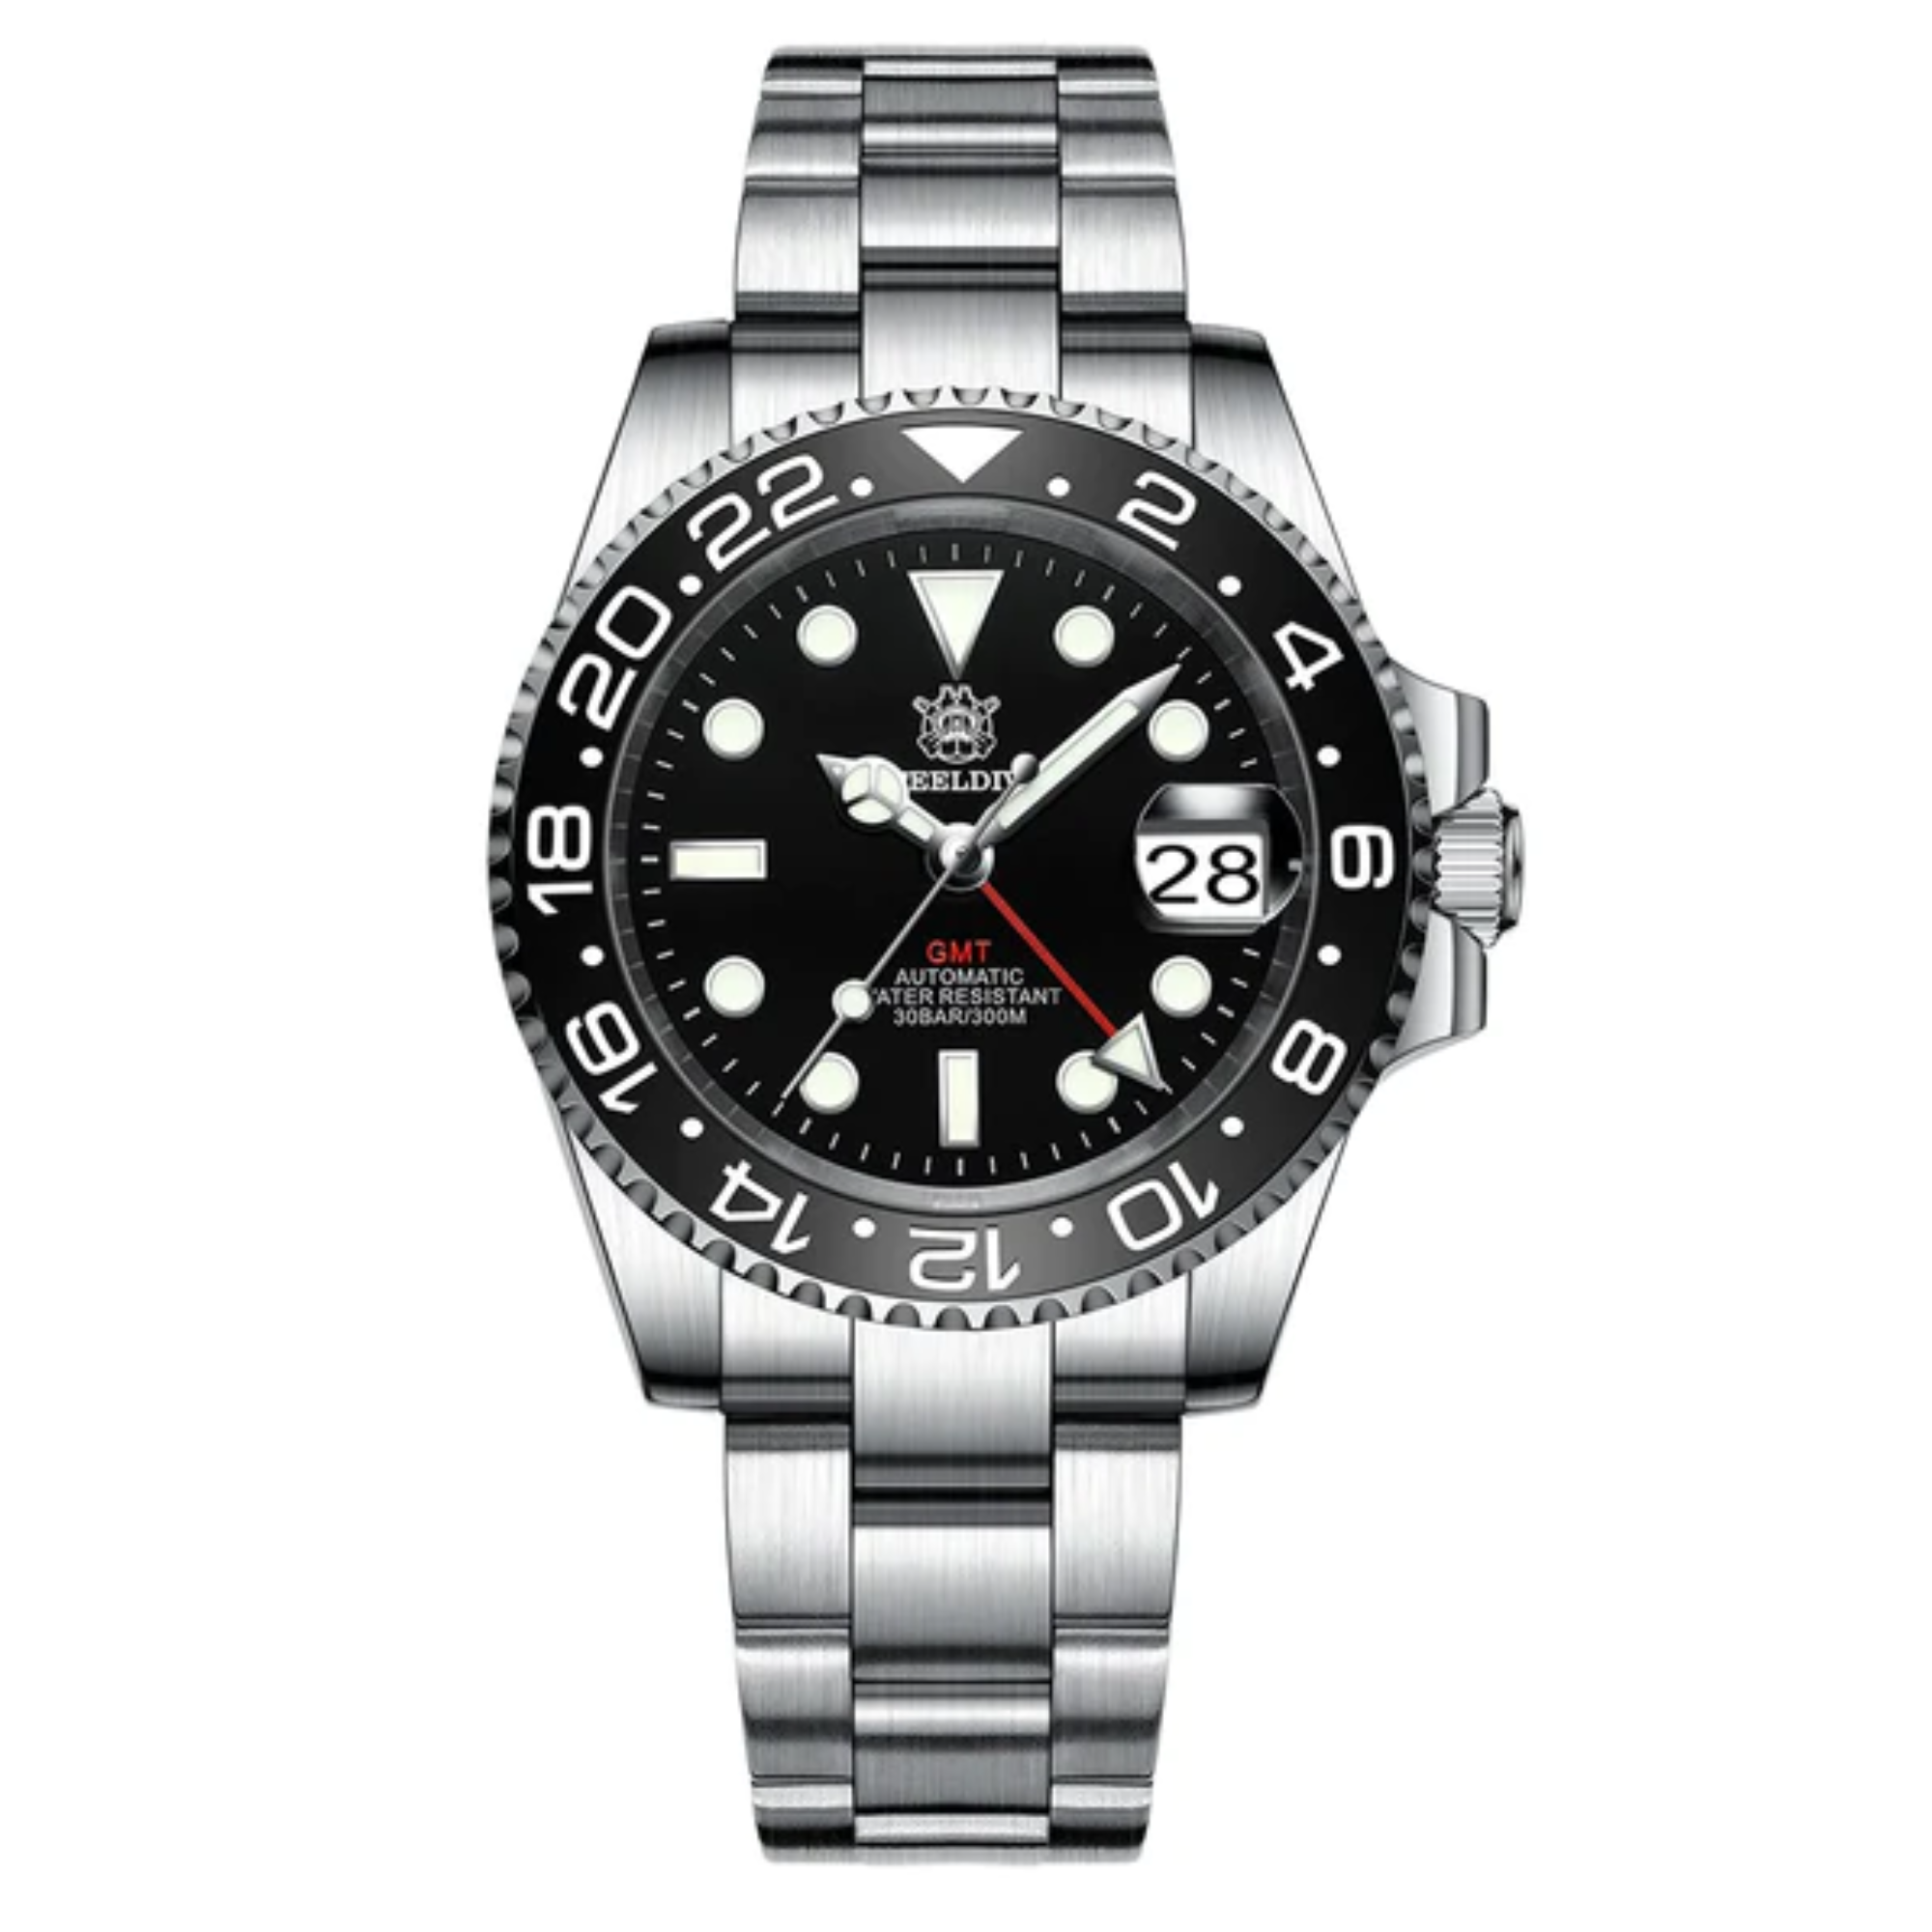 Steeldive SD1993 NH34 GMT Automatic Watch V2 Black Dial With Oyster Bracelet